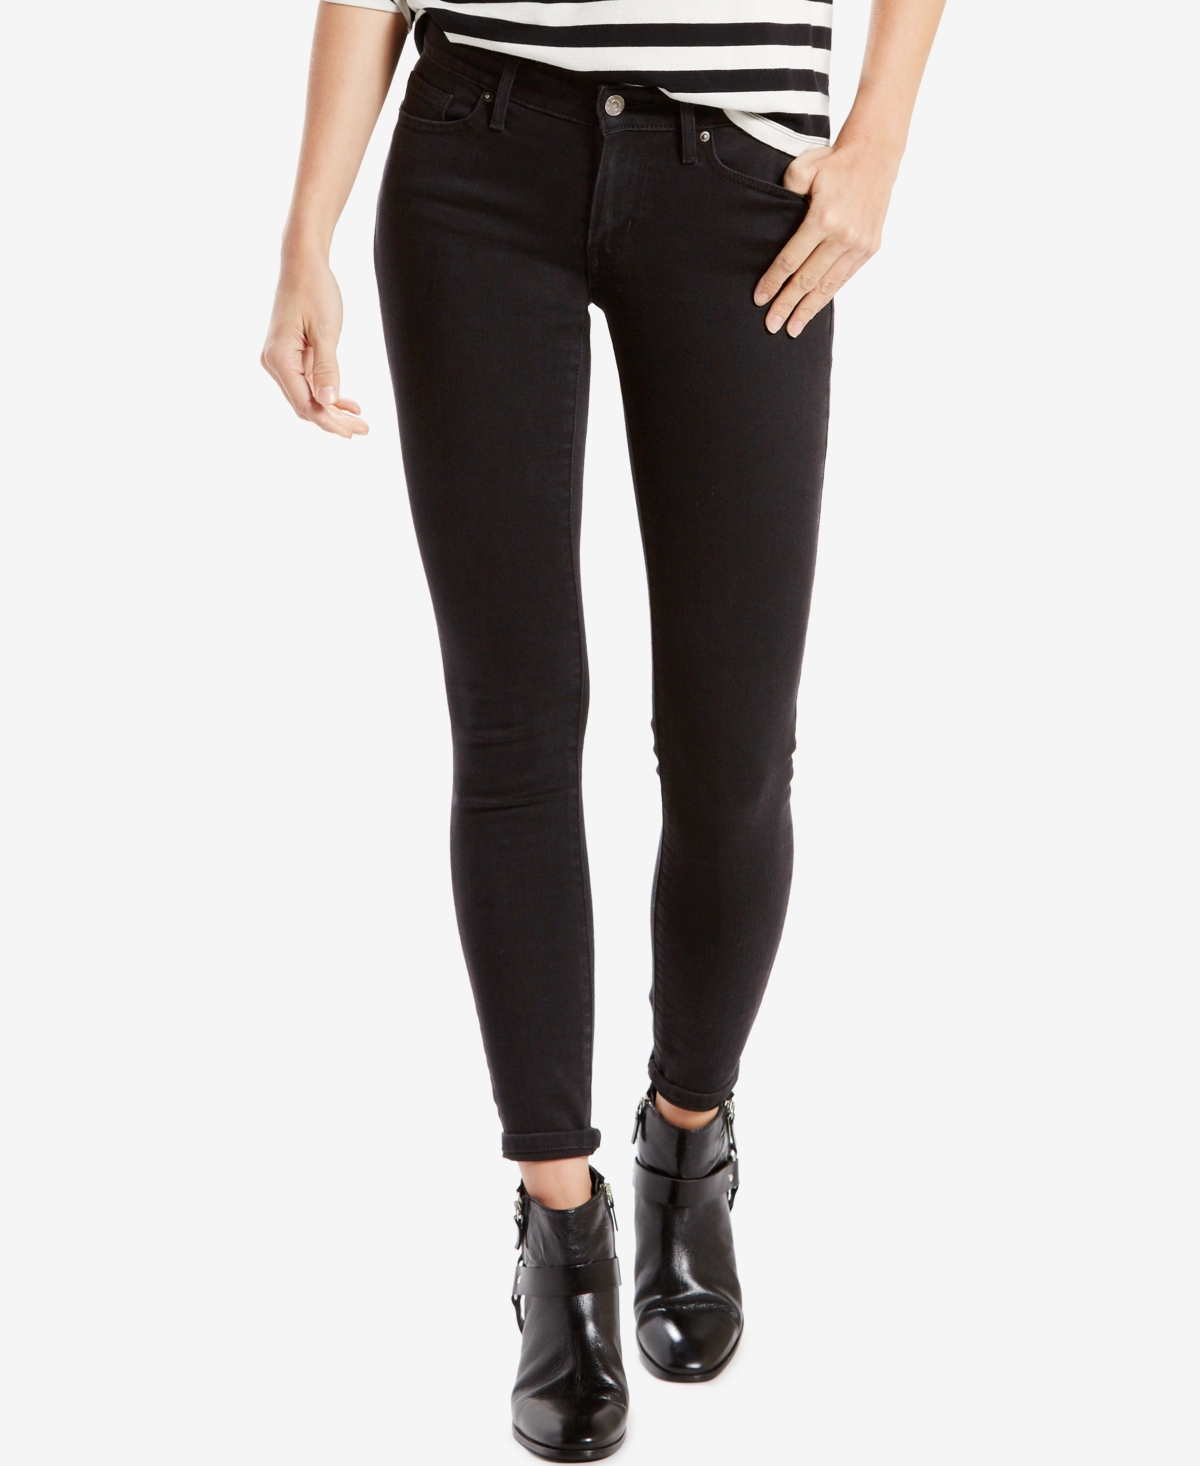 Women's 711 Skinny Stretch Jeans in Extra Short Length - Soft Black